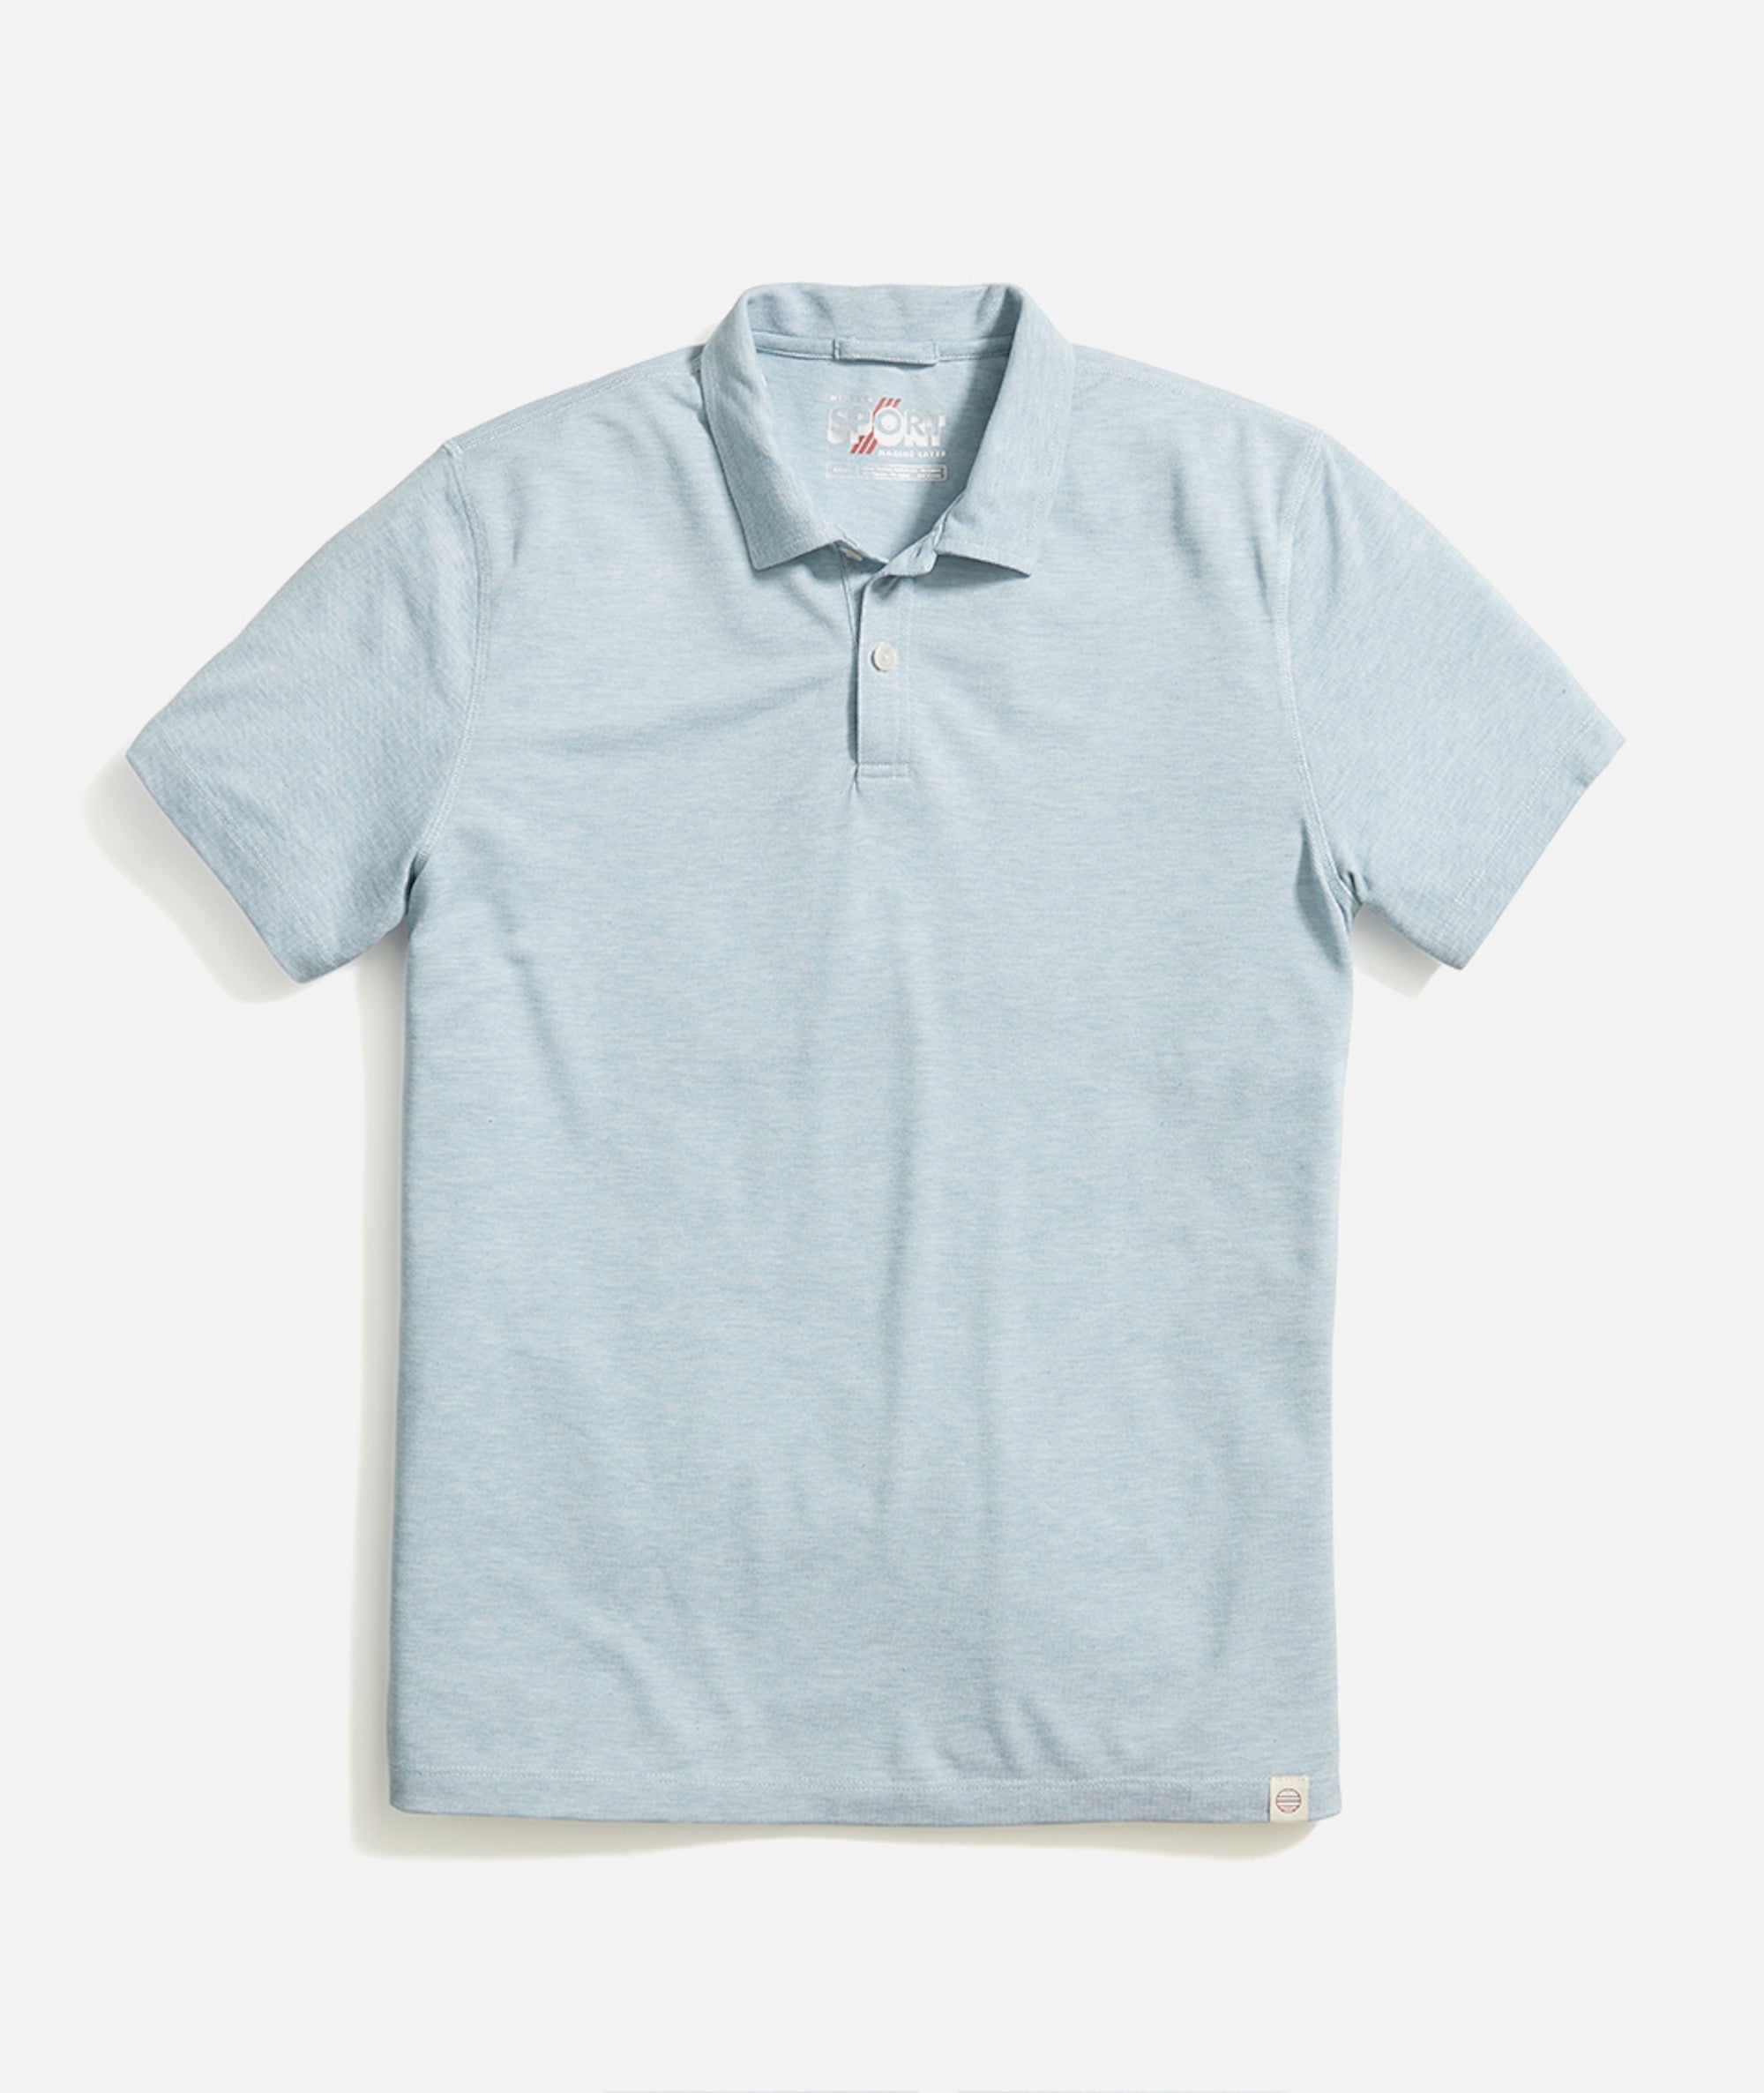 Blue Marine Polo Cool Pique Cotton – Heather China in Layer